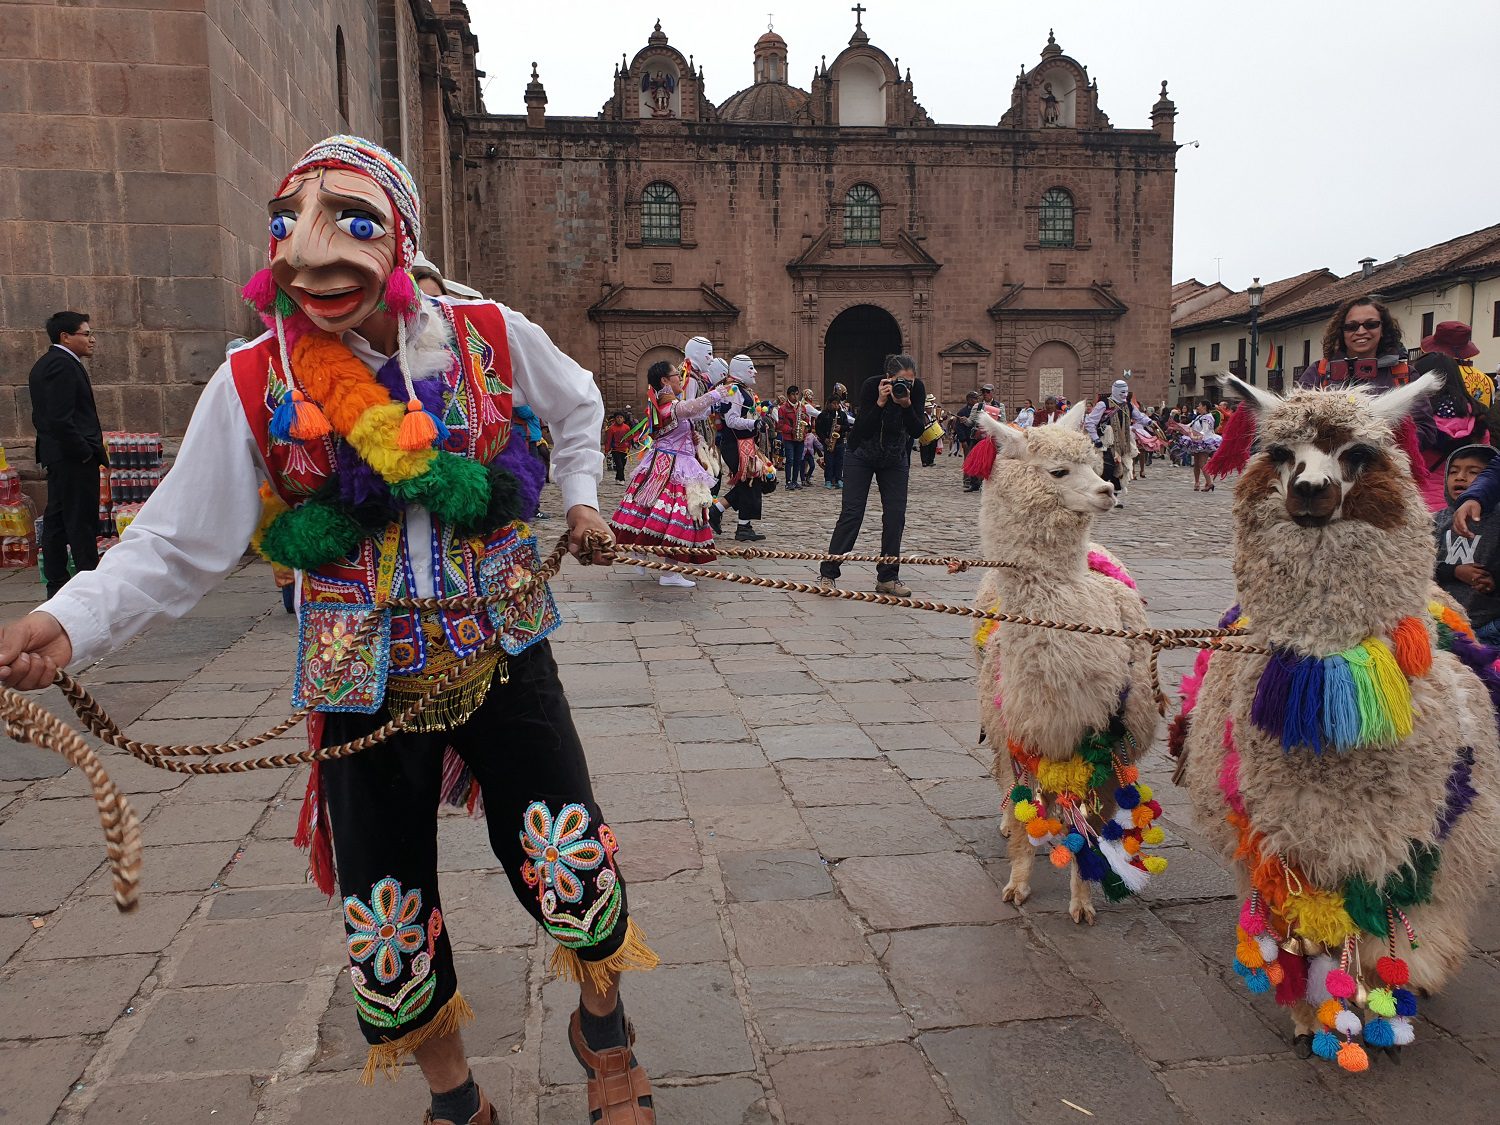 11Cusco has many fiestas and local traditions all year long. Visit Cusco with RESPONSible Travel Peru!